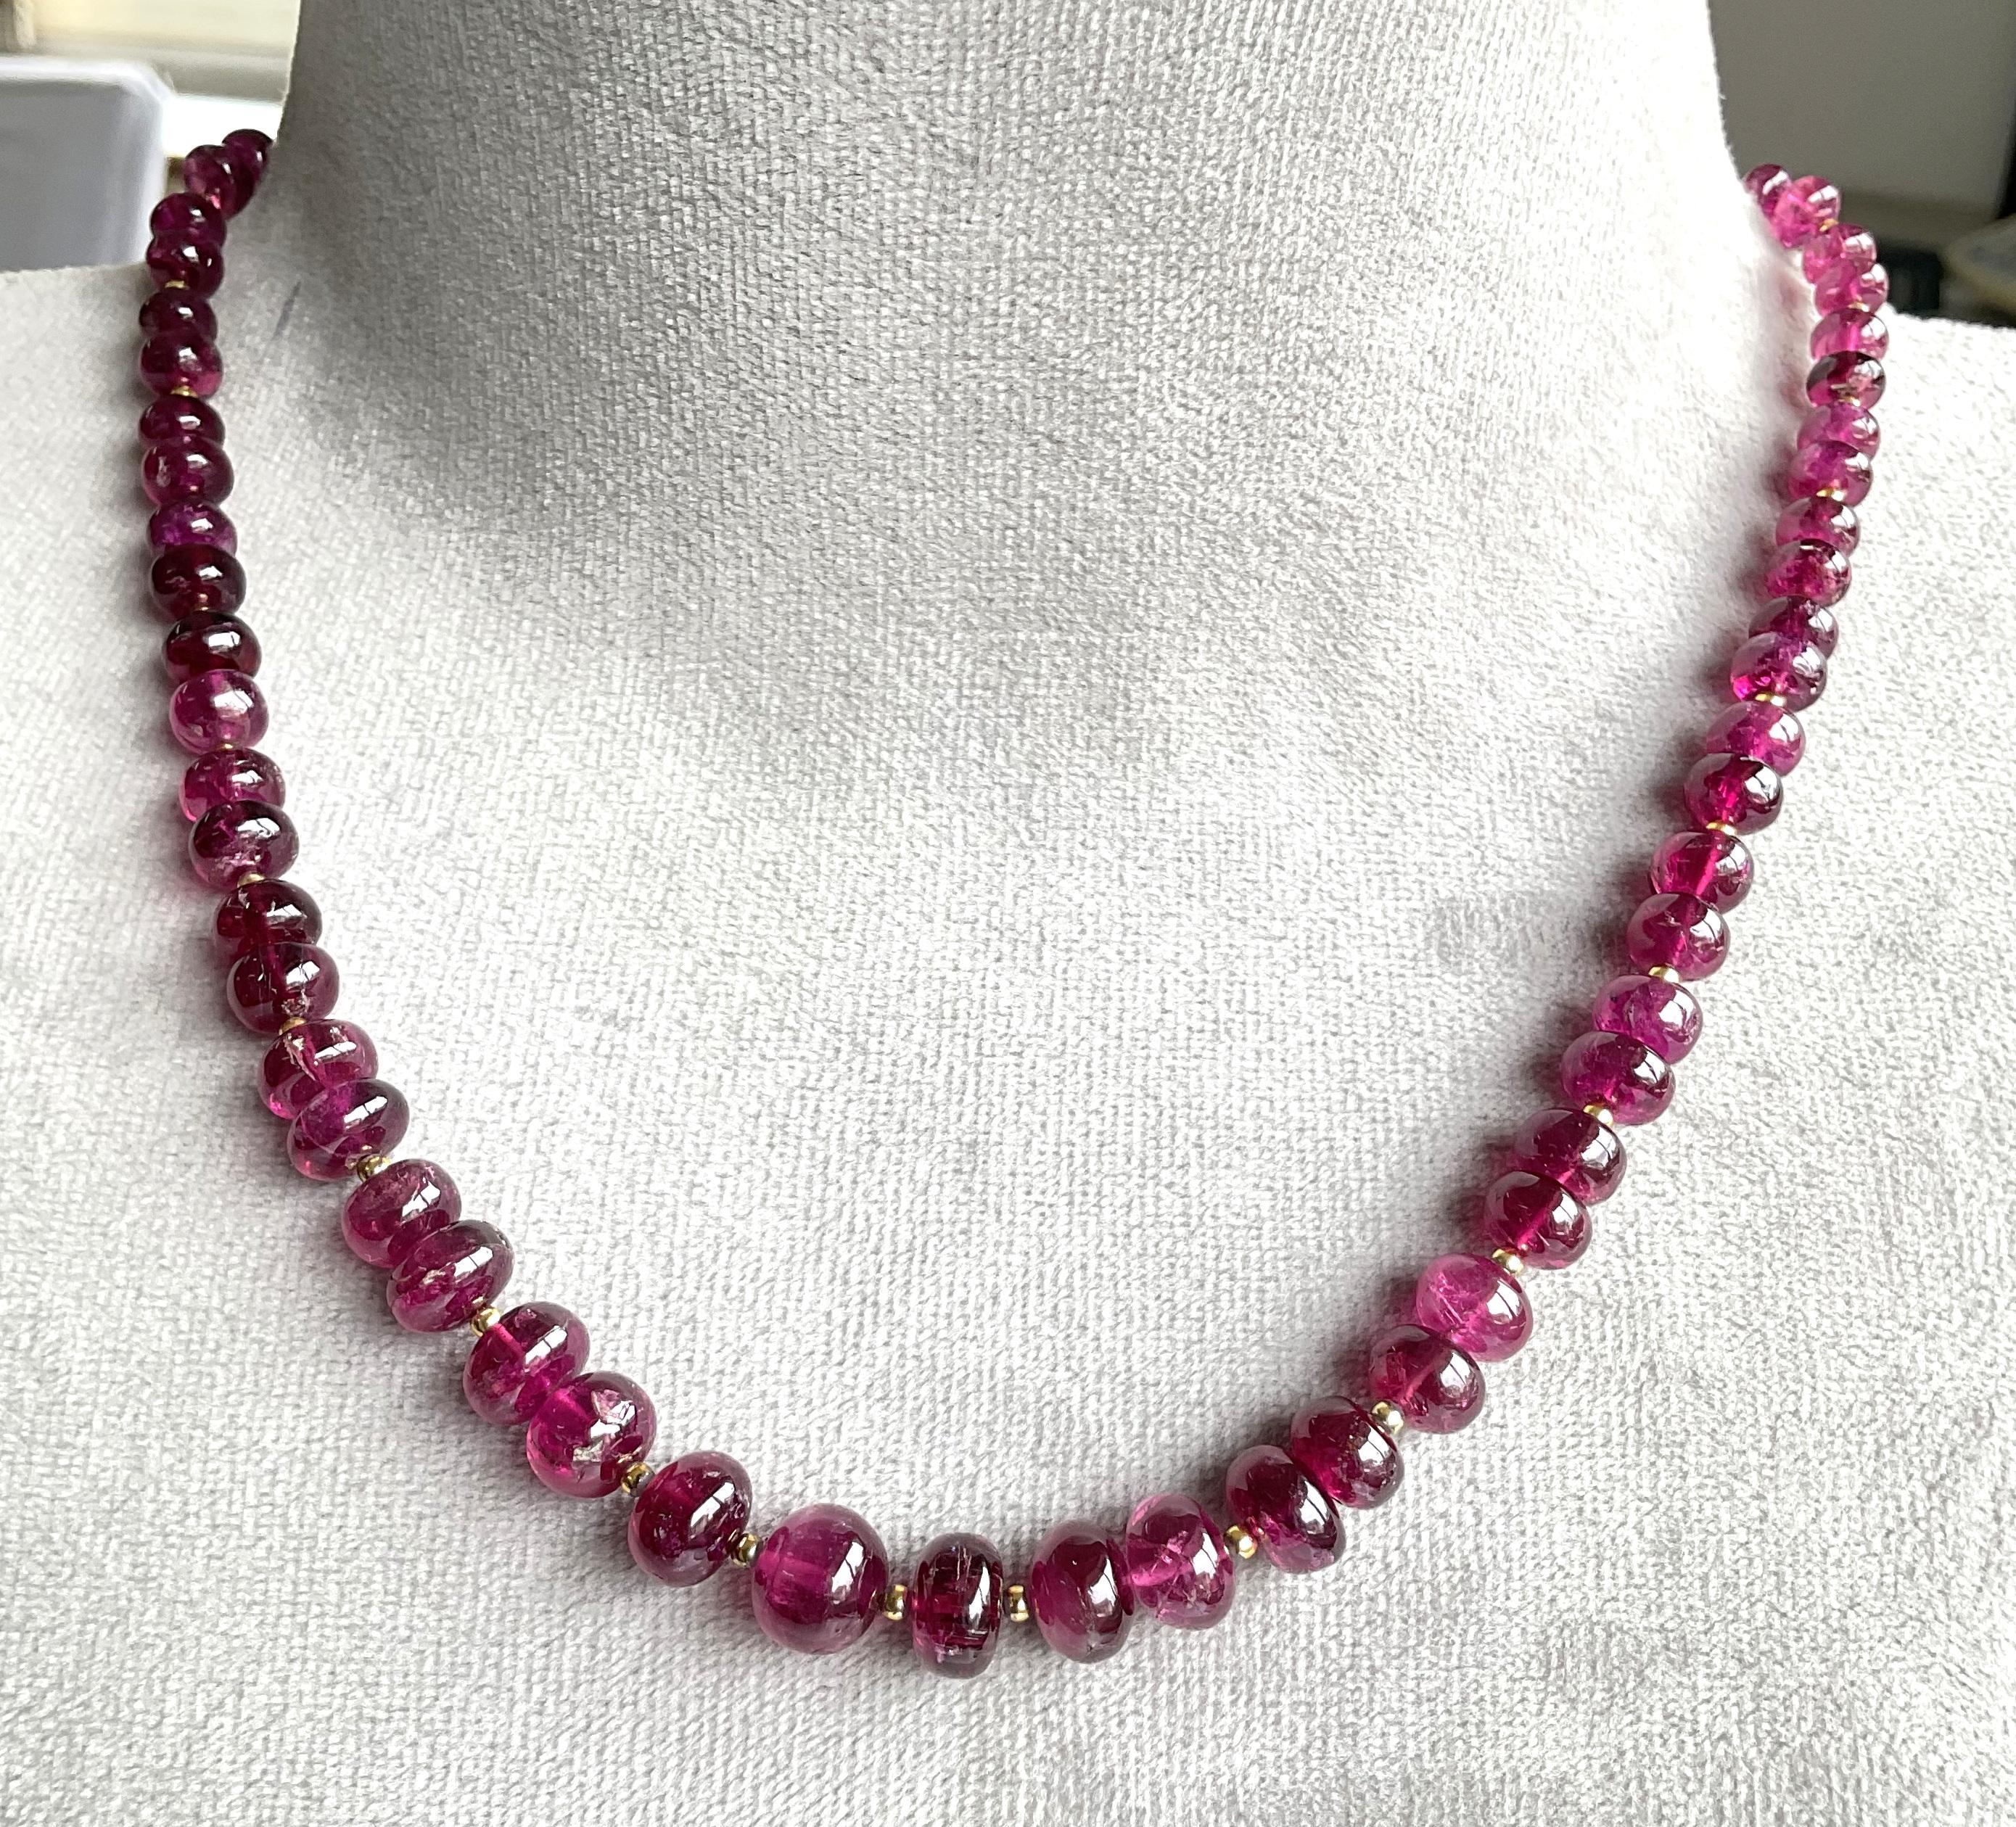 163.00 Carats Rubellite Tourmaline Necklace Fine Jewelry Natural Gemstone Beads For Sale 1